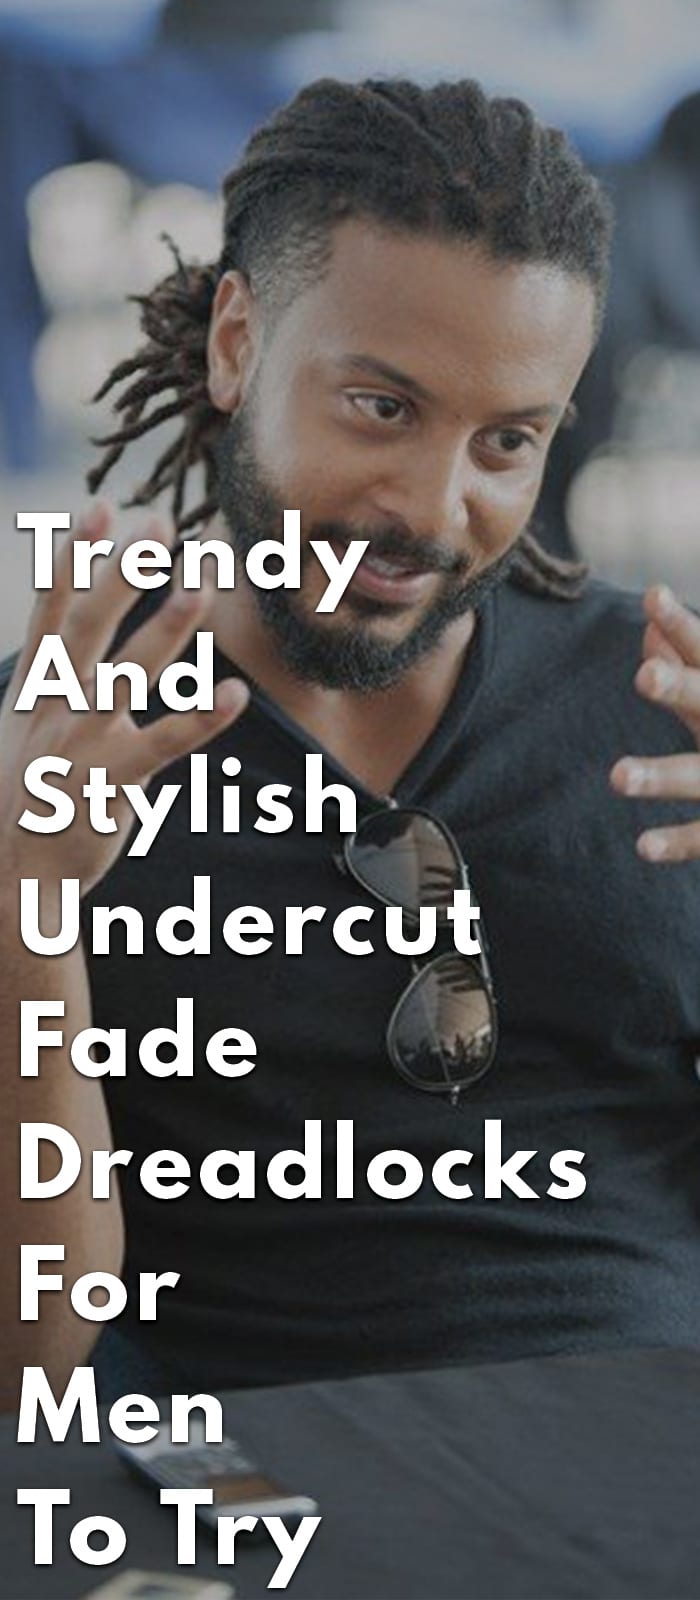 Trendy And Stylish Undercut Fade Dreadlocks For Men To Try